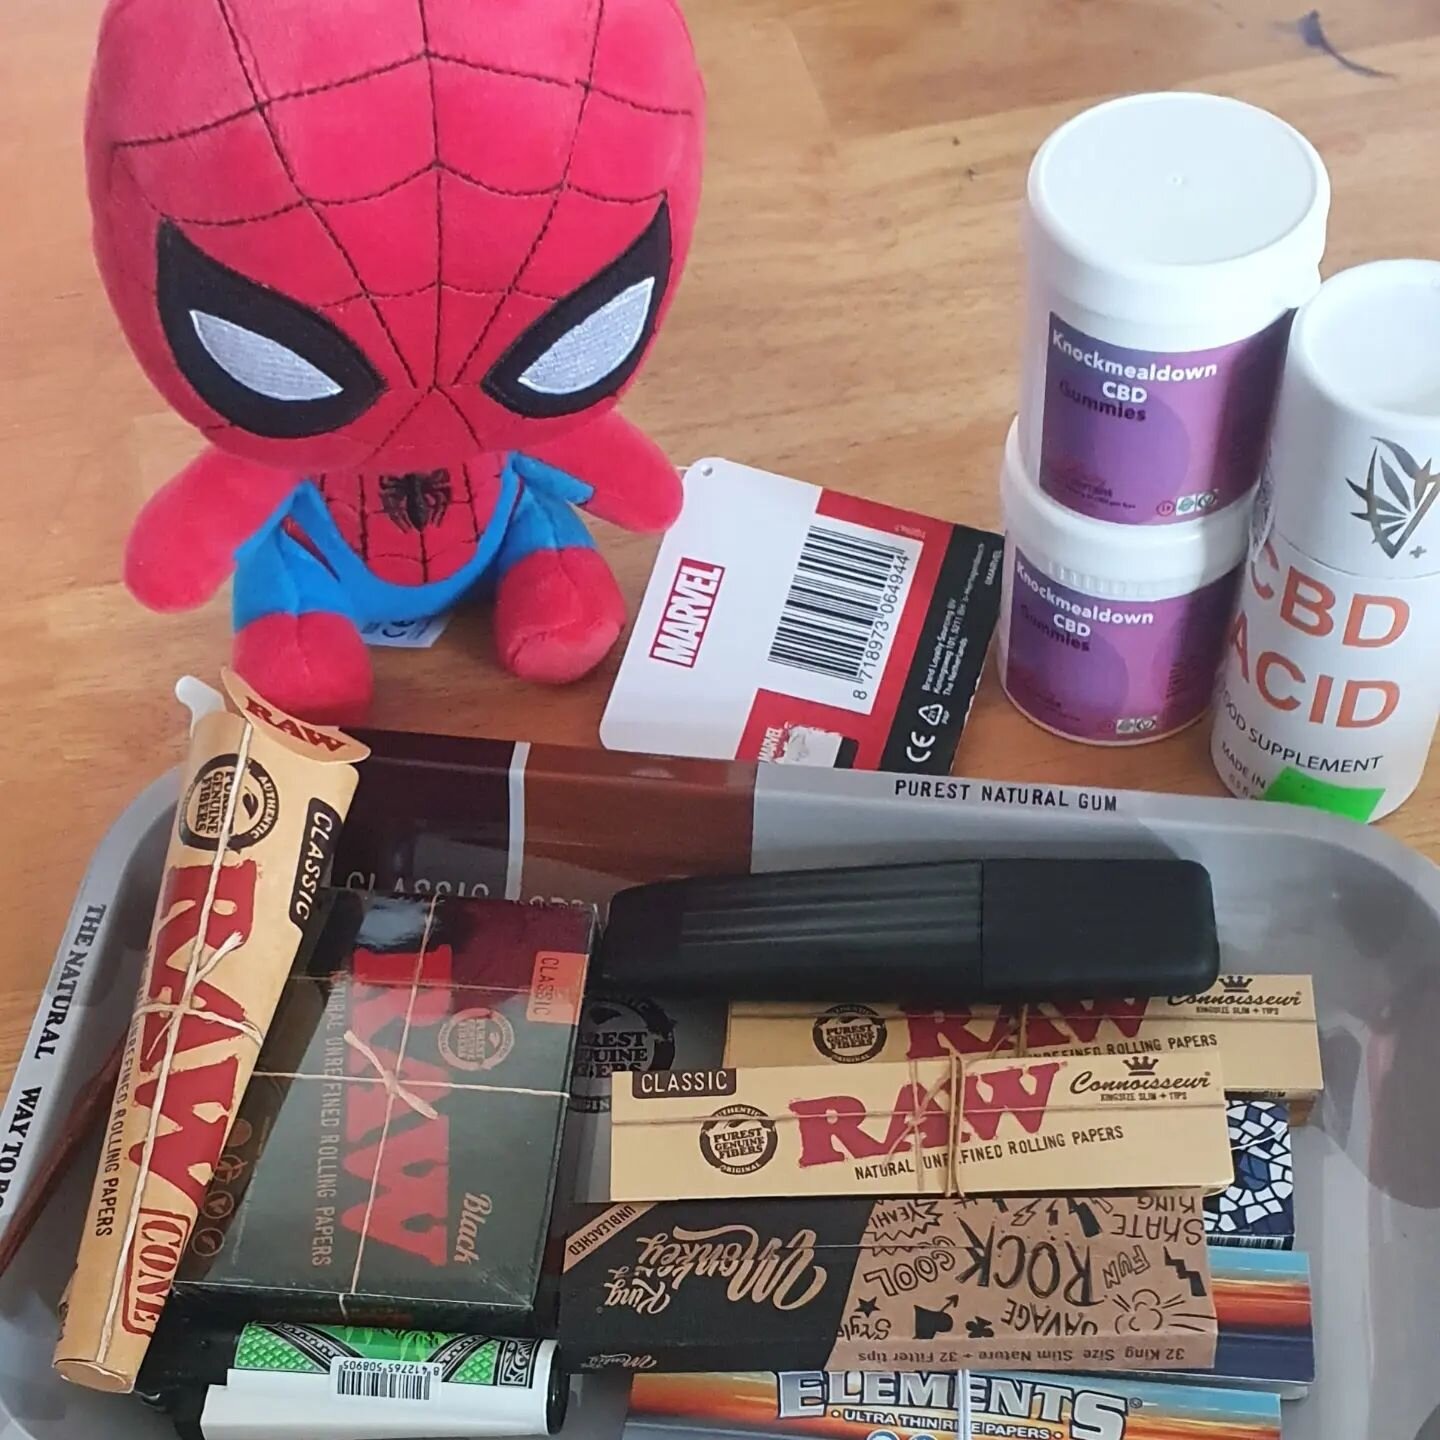 Massive thanks going out to @r420supplies for sending down house warming gifts for me and the family. 
The girls are delighted with their presents and Elijah was happy out with his new little Spiderman. 
The CBD drops and gunmies will help keep herse